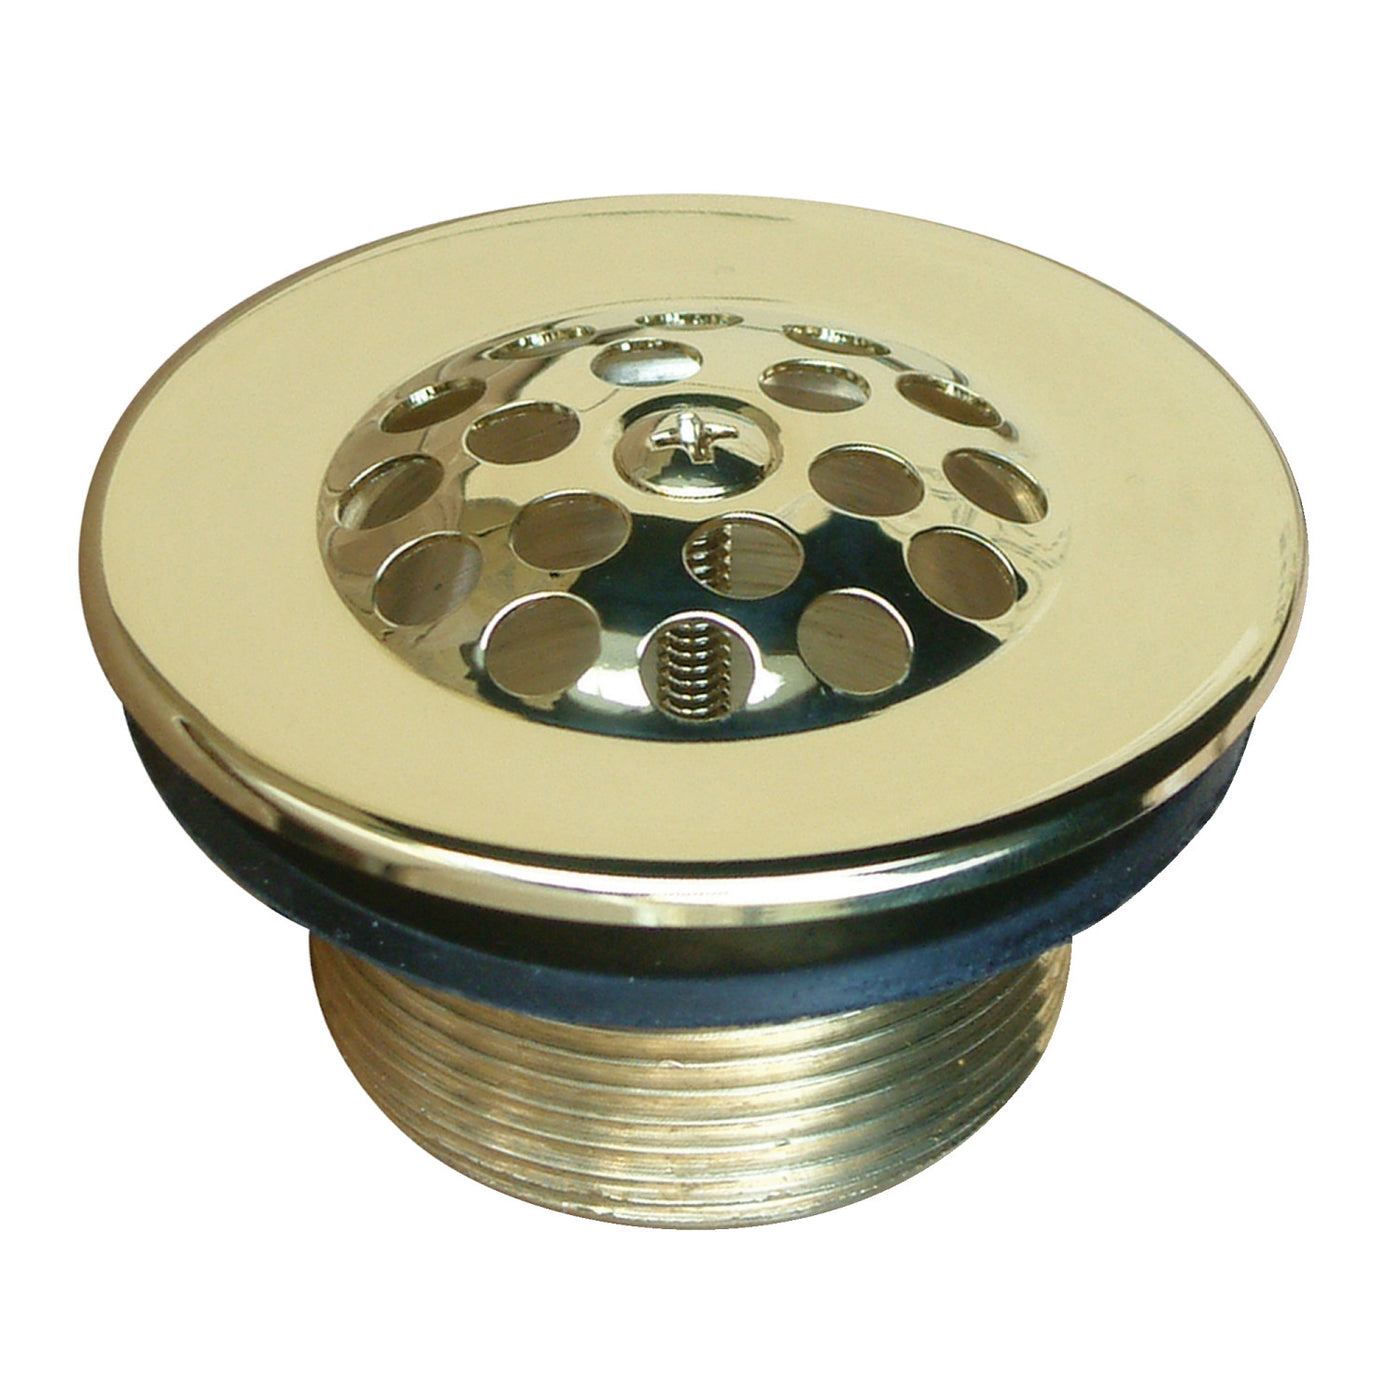 Elements of Design EDTL202 Bathtub Strainer Drain with Rubber, Polished Brass